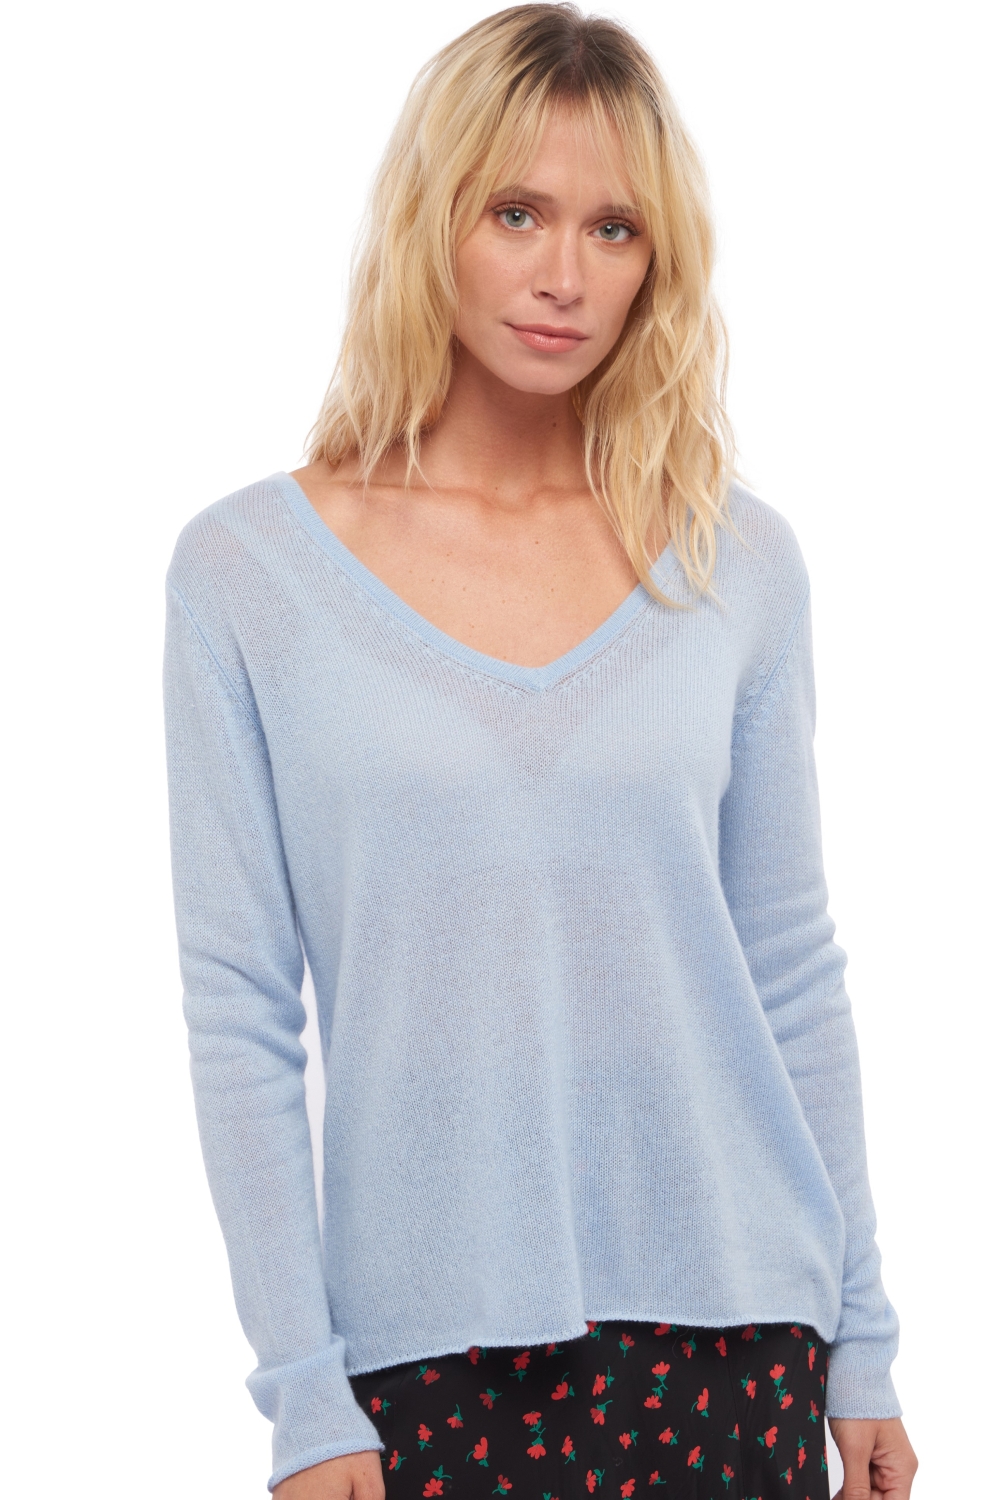 Cashmere ladies basic sweaters at low prices flavie ciel 2xl